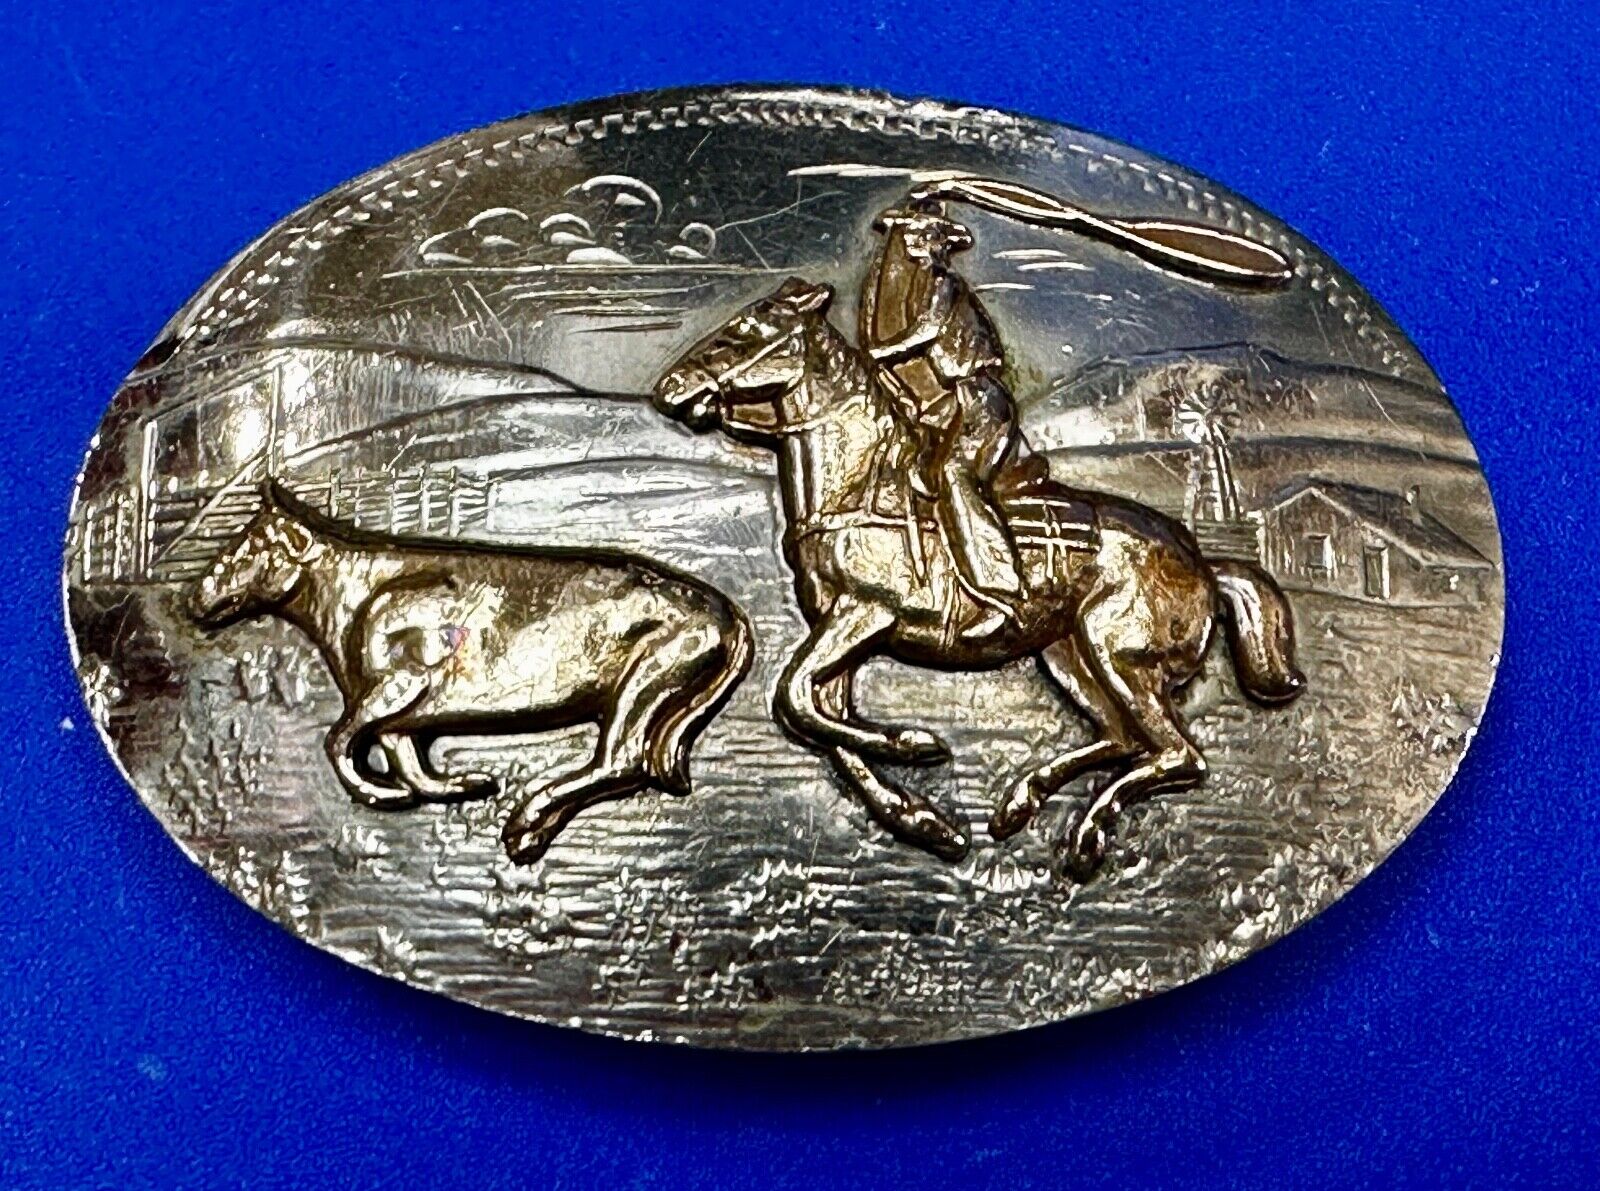 Two Horse Riding Cowboy's German Silver Belt Buckle by Comstock Silversmiths